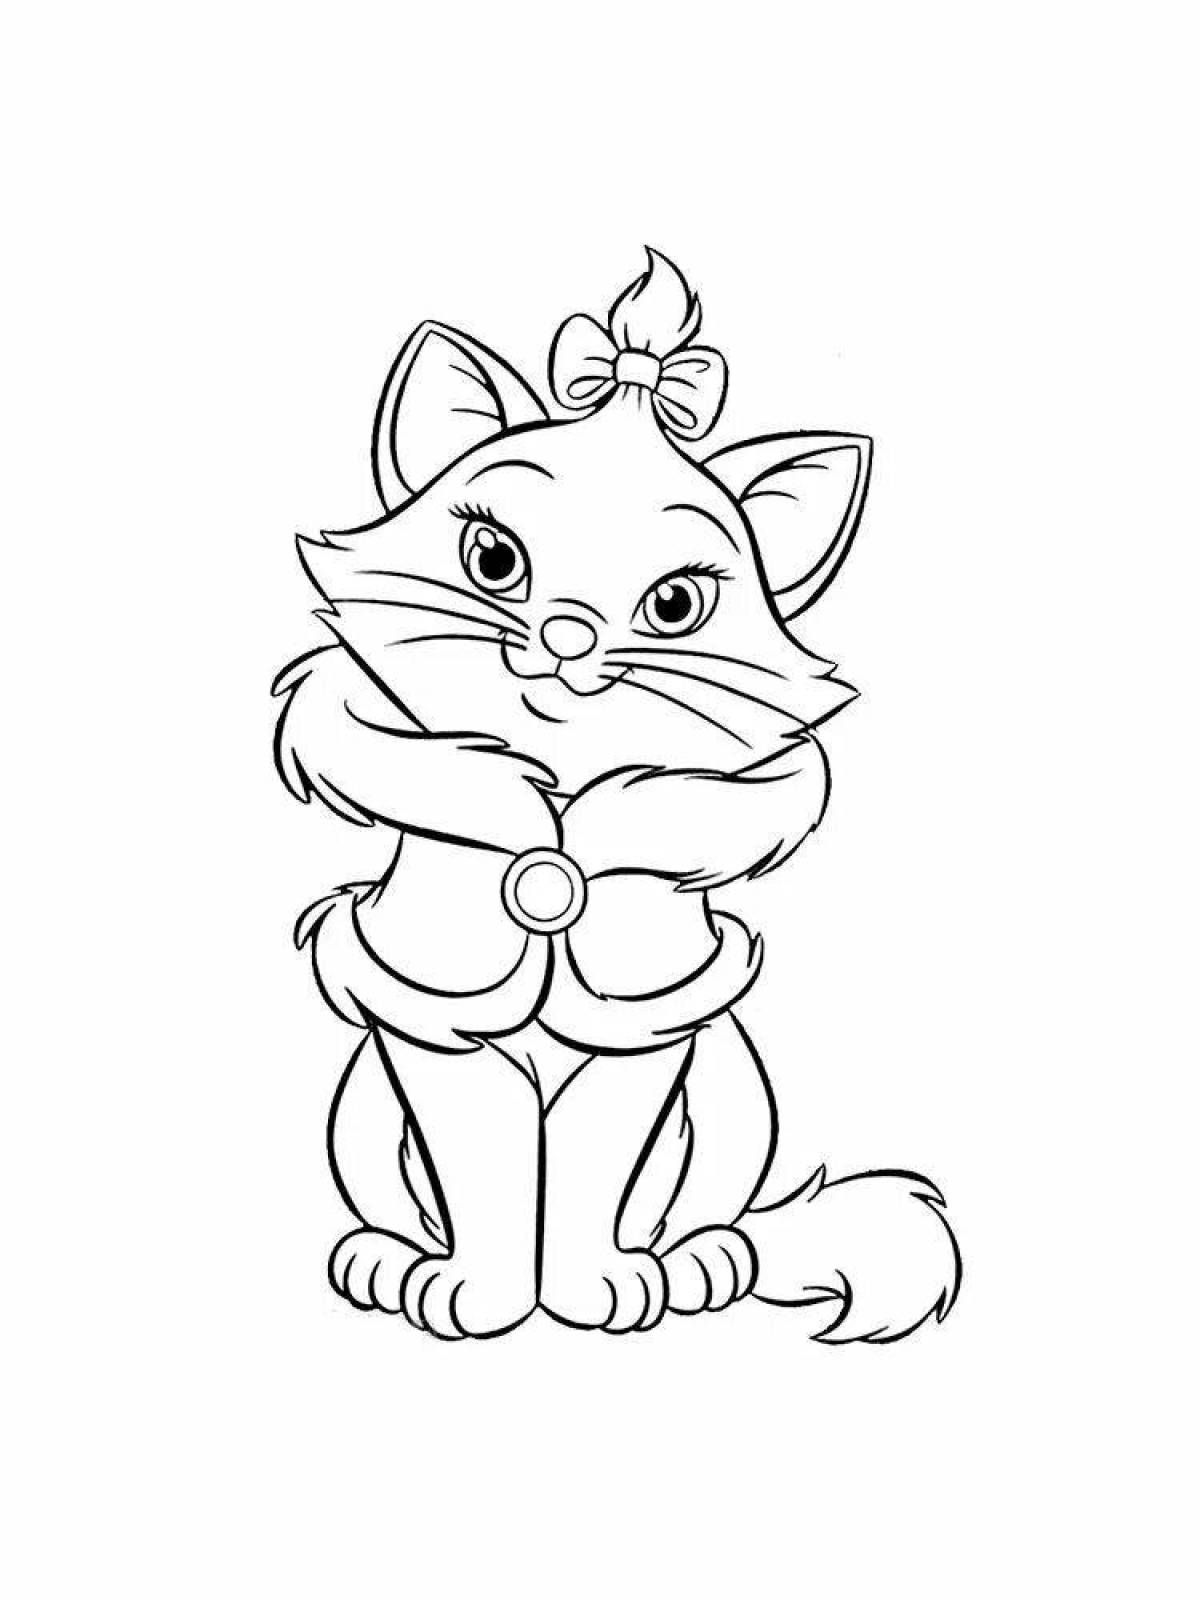 Exquisite marie kitty coloring page